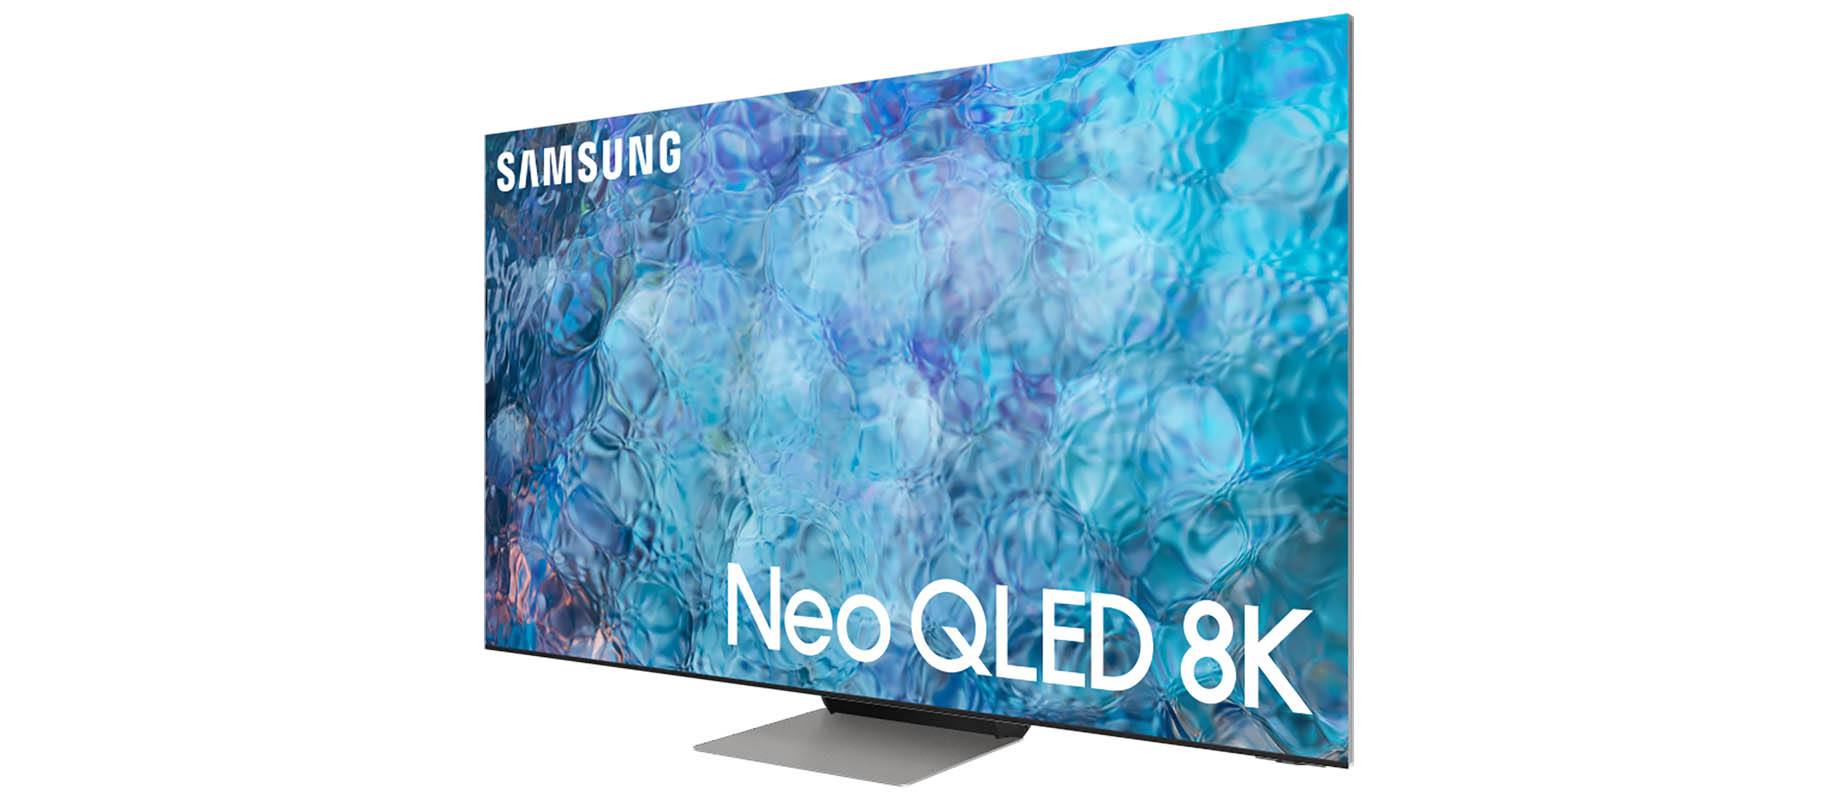 Samsung Lays Out Its 2021 Rollout Plans for 4K, 8K TVs